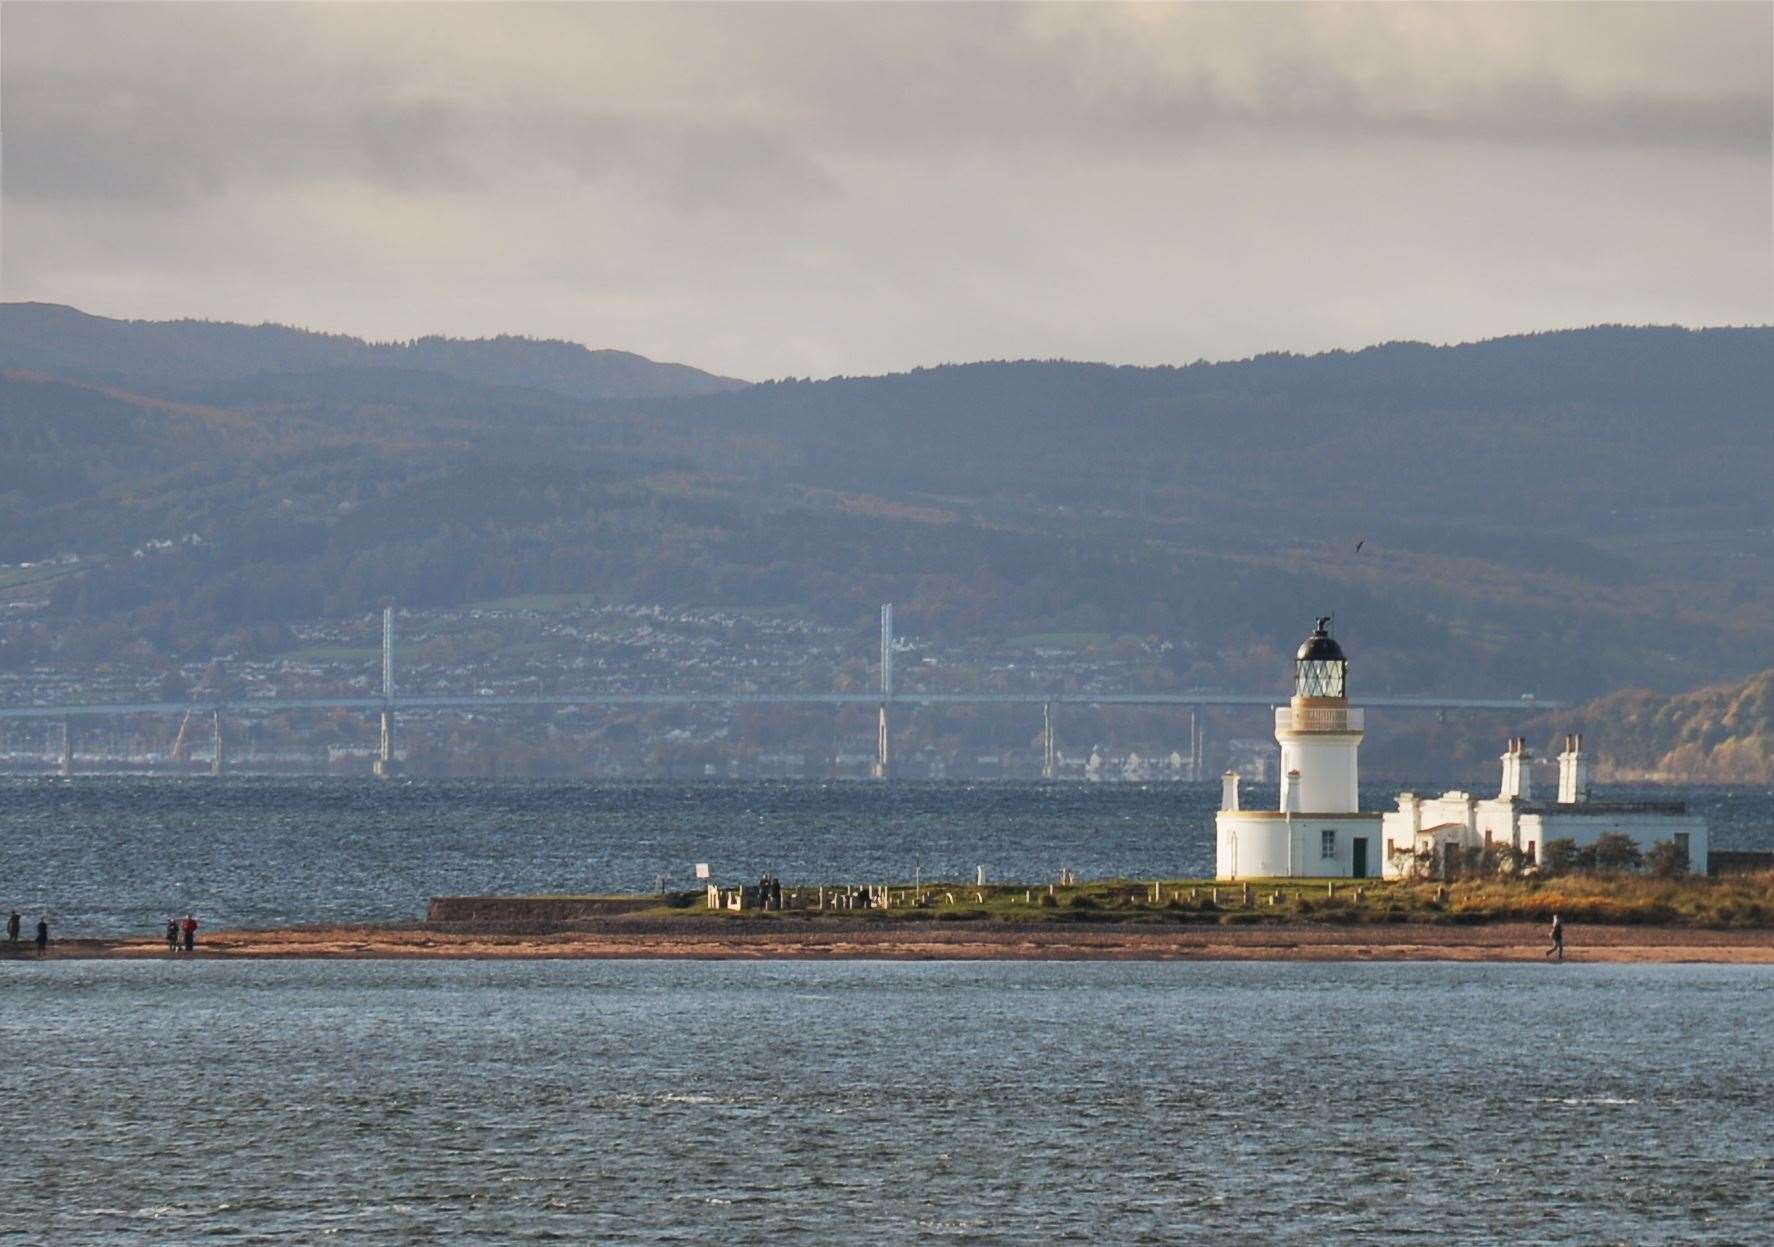 The Black Isle is preparing for the return of visitors in line with Scottish Government guidance on reopening the hospitality and tourism trade gradually. Picture: Gary Anthony.